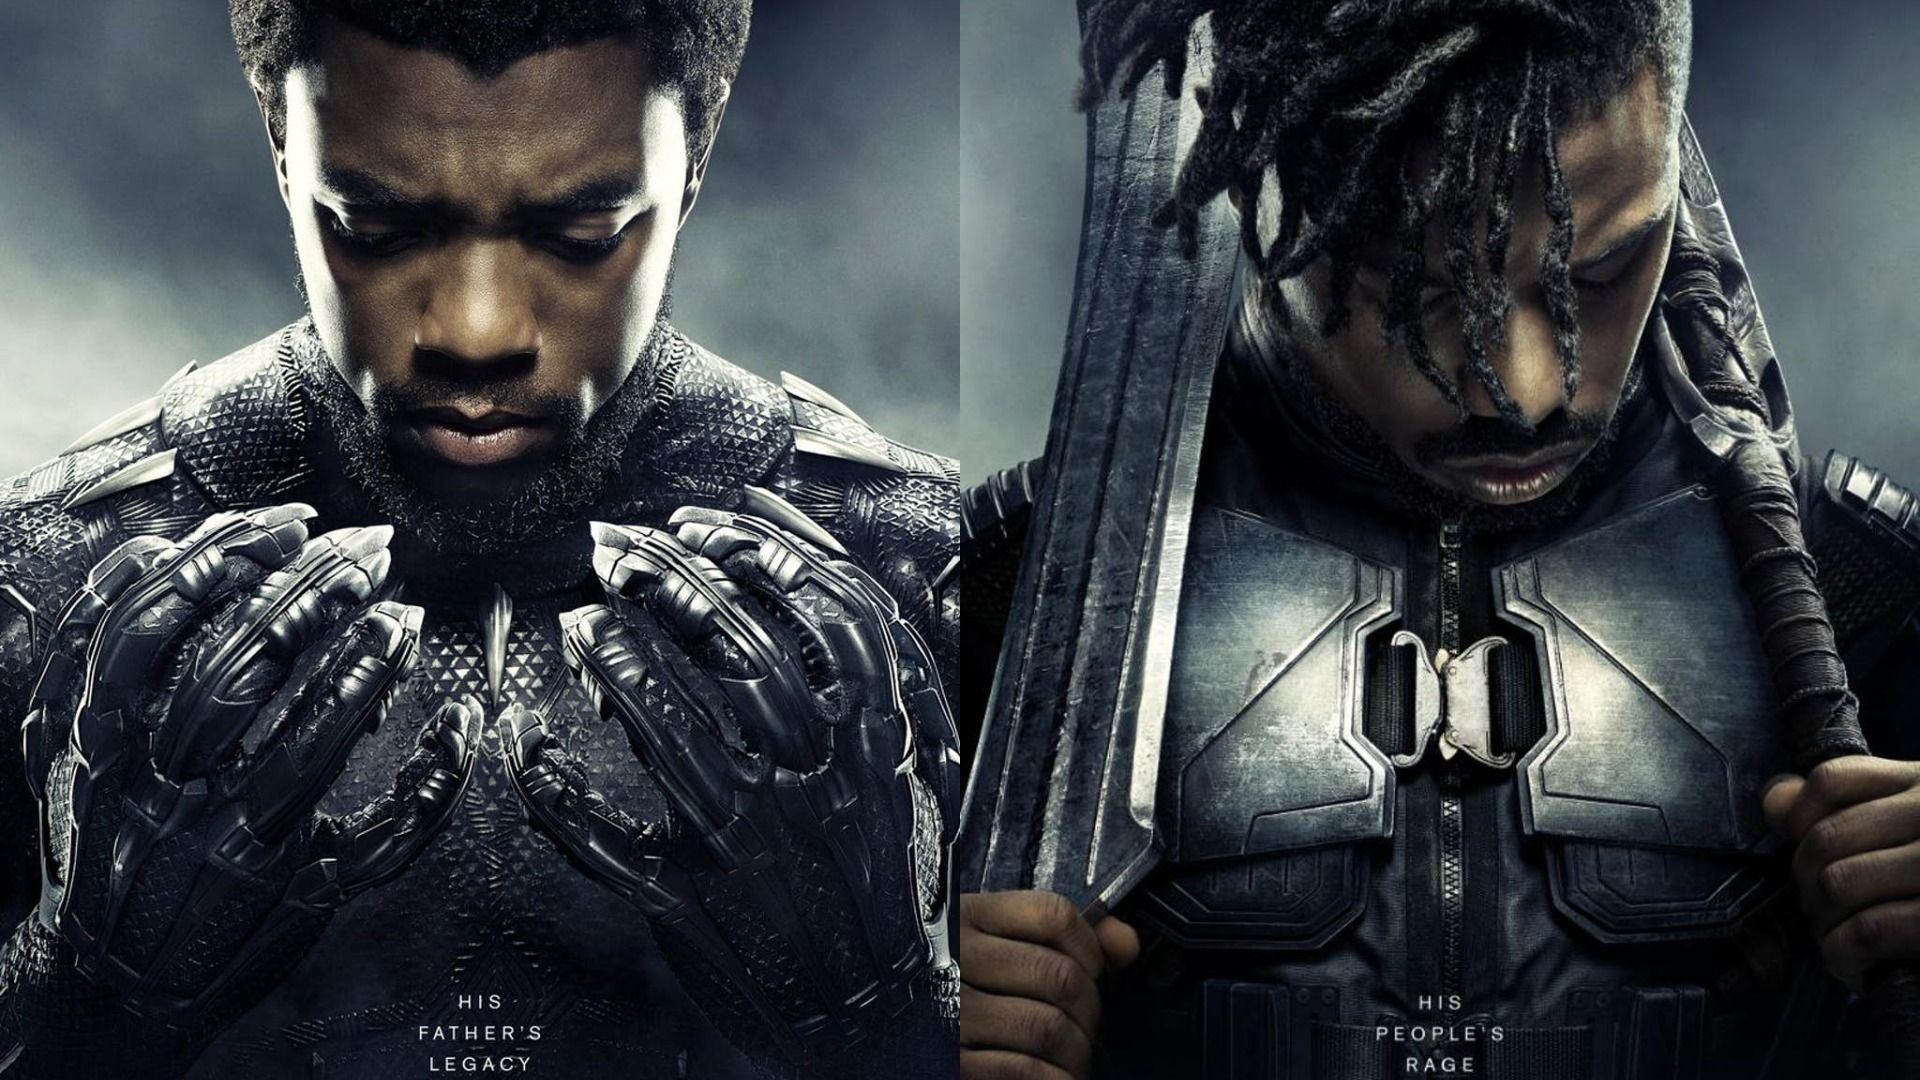 Black Panther Character Posters Released Superheroes